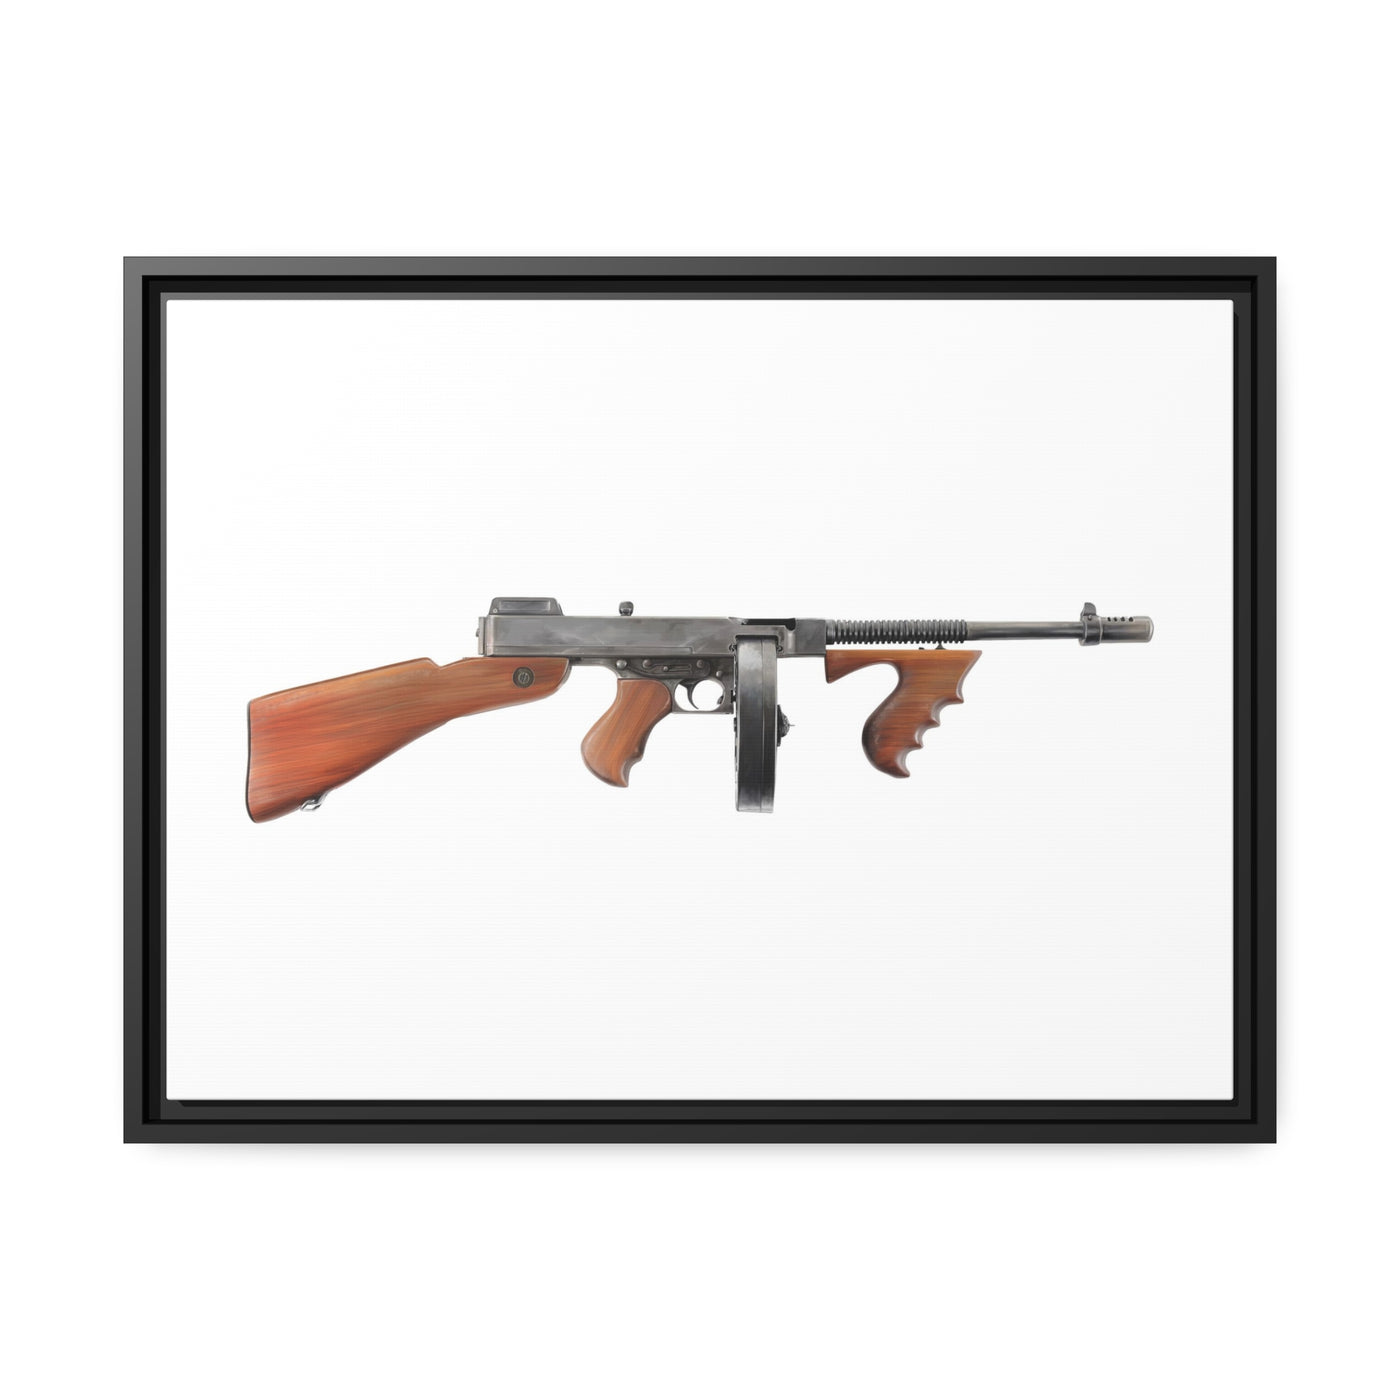 The “OG” Mobster Machine Gun - Just The Piece - Black Framed Wrapped Canvas - Value Collection